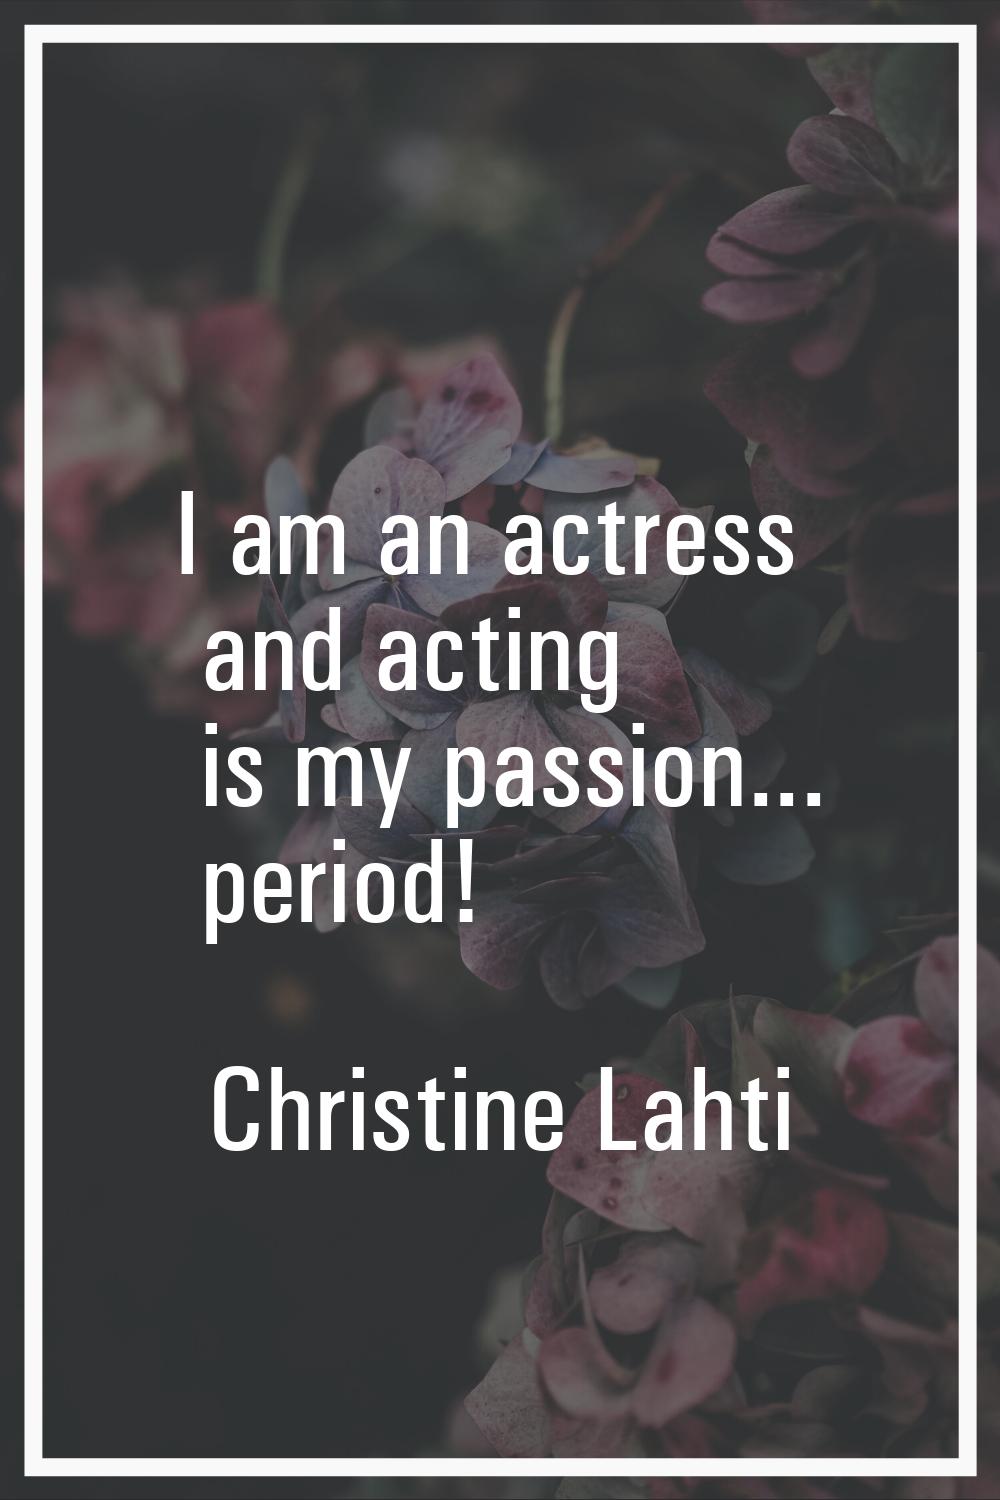 I am an actress and acting is my passion... period!